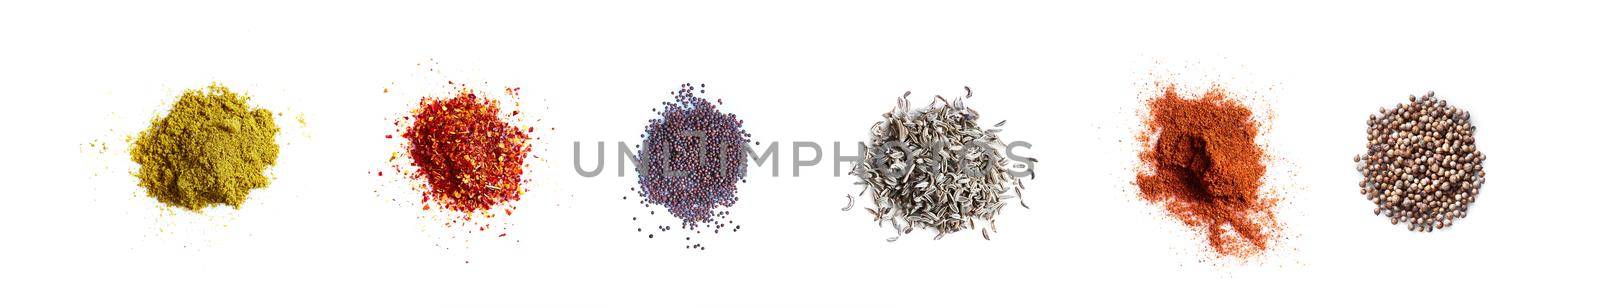 Set of different spices. Isolated on white background by nazarovsergey